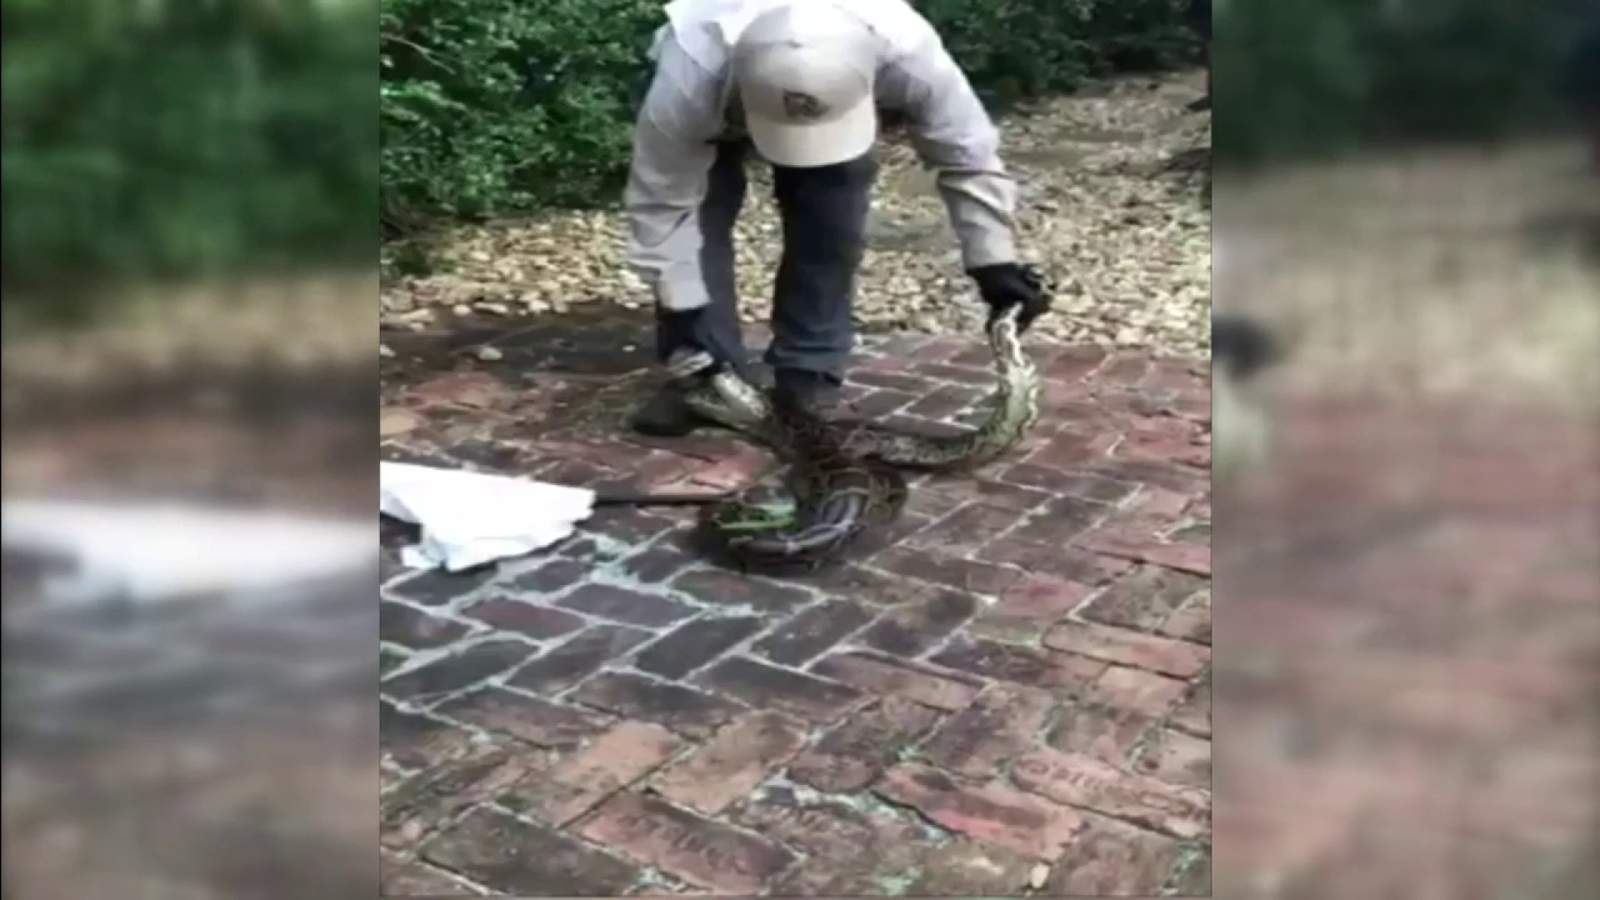 Large python caught in Coral Gables as sightings grow, likely due to colder temperatures